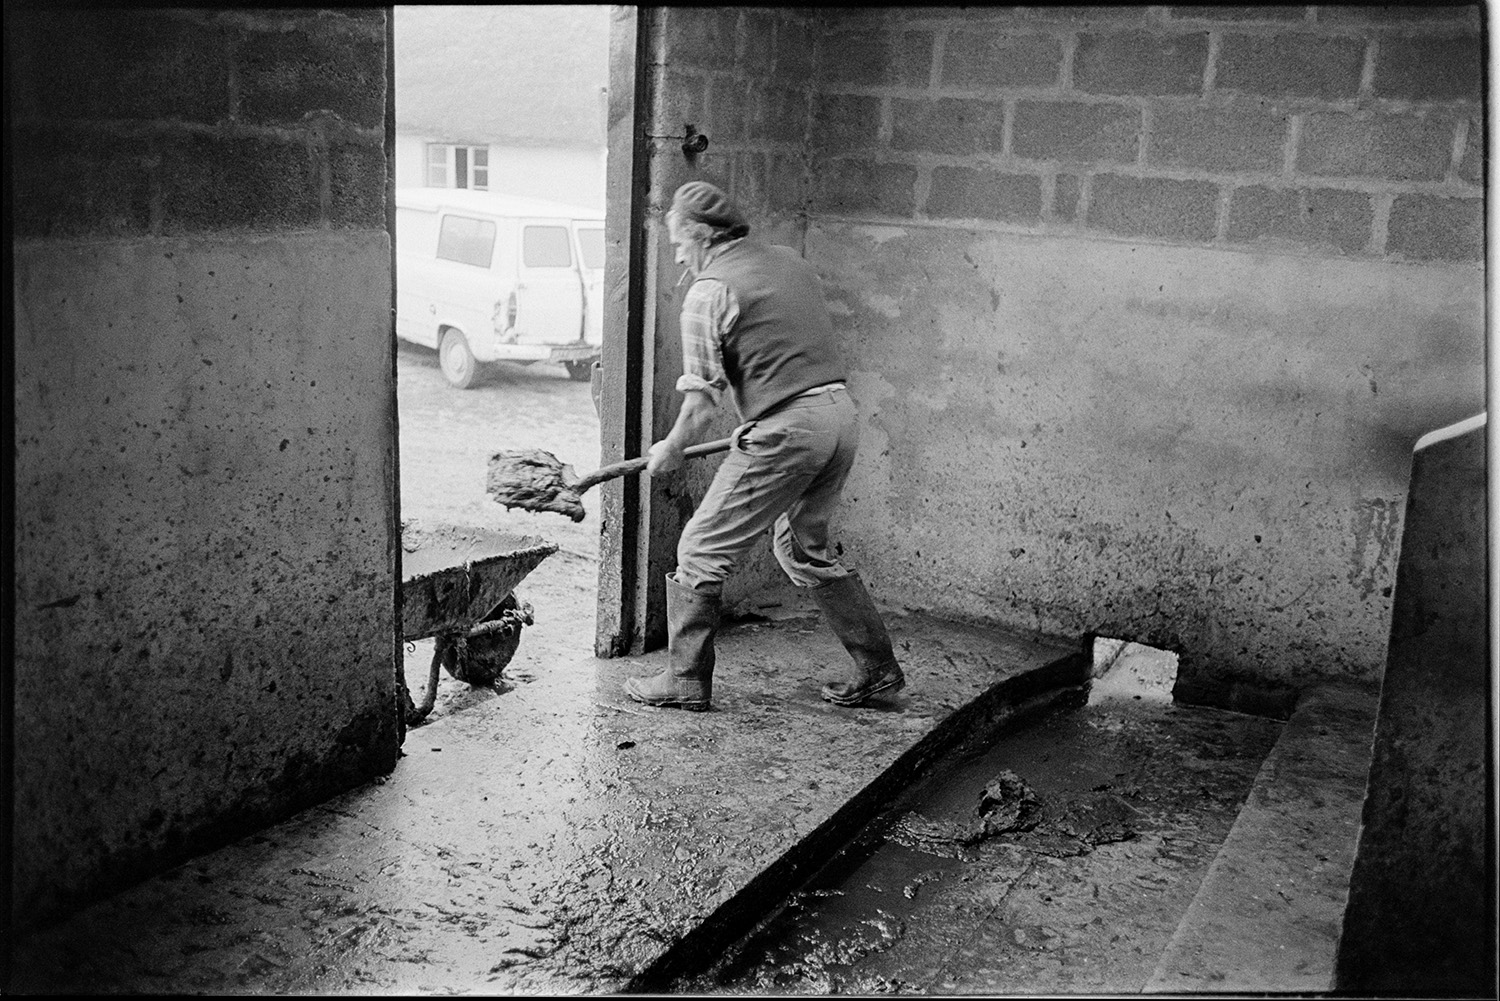 Farmer washing out milking parlour after milking. 
[William Medland mucking out the milking parlour at Hallcourt, Petrockstowe after milking cows. He is using a shovel and wheelbarrow.]